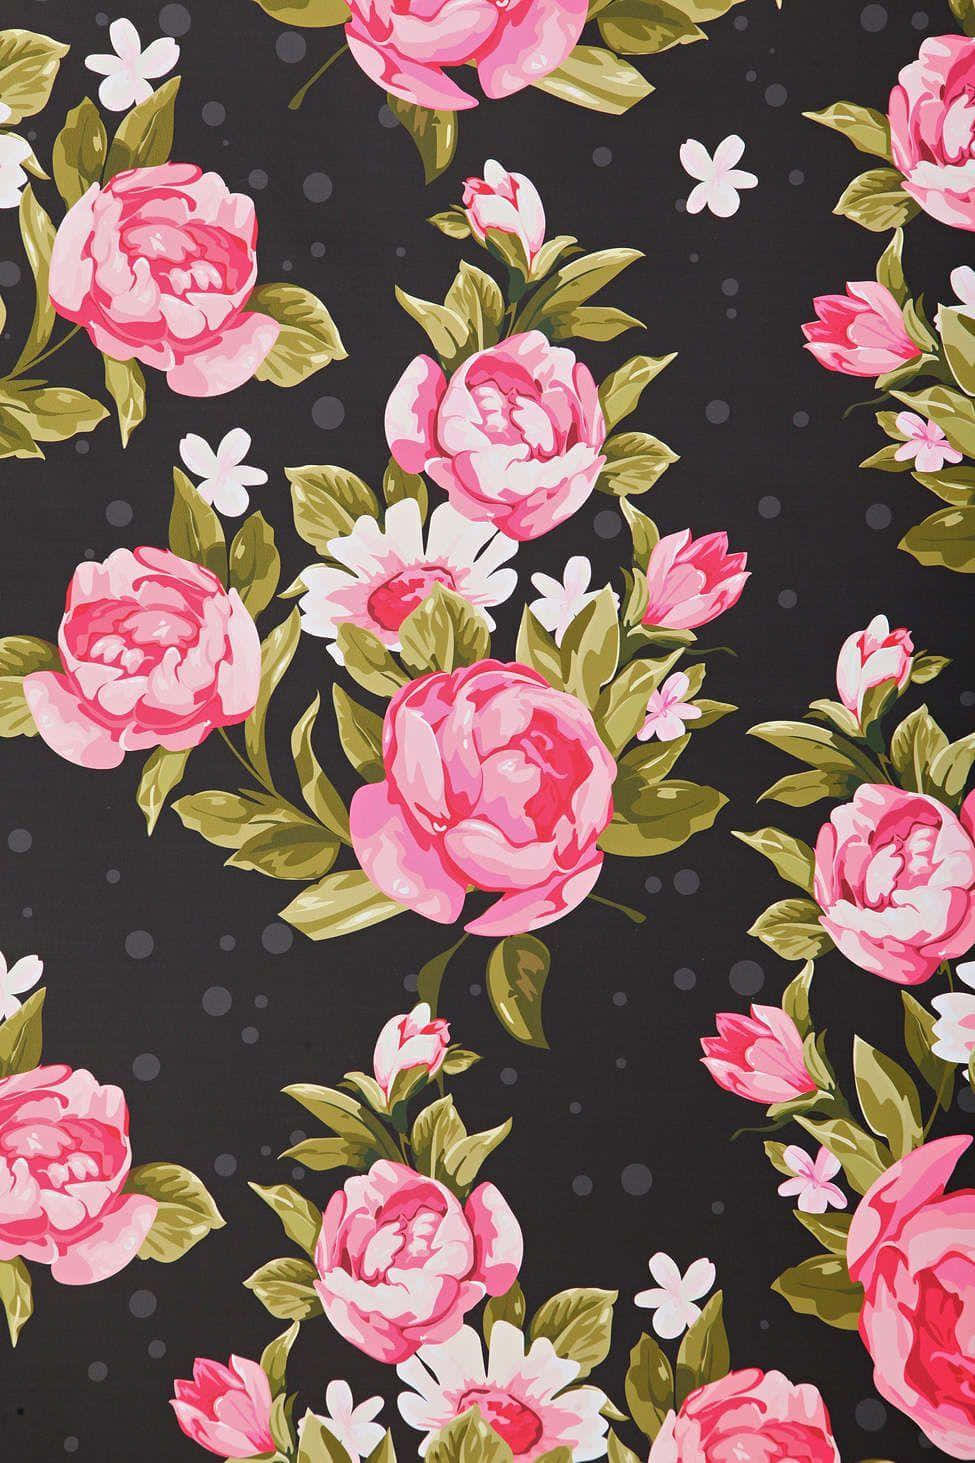 Adorable Flower Background Featuring a Lovely Floral Arrangement